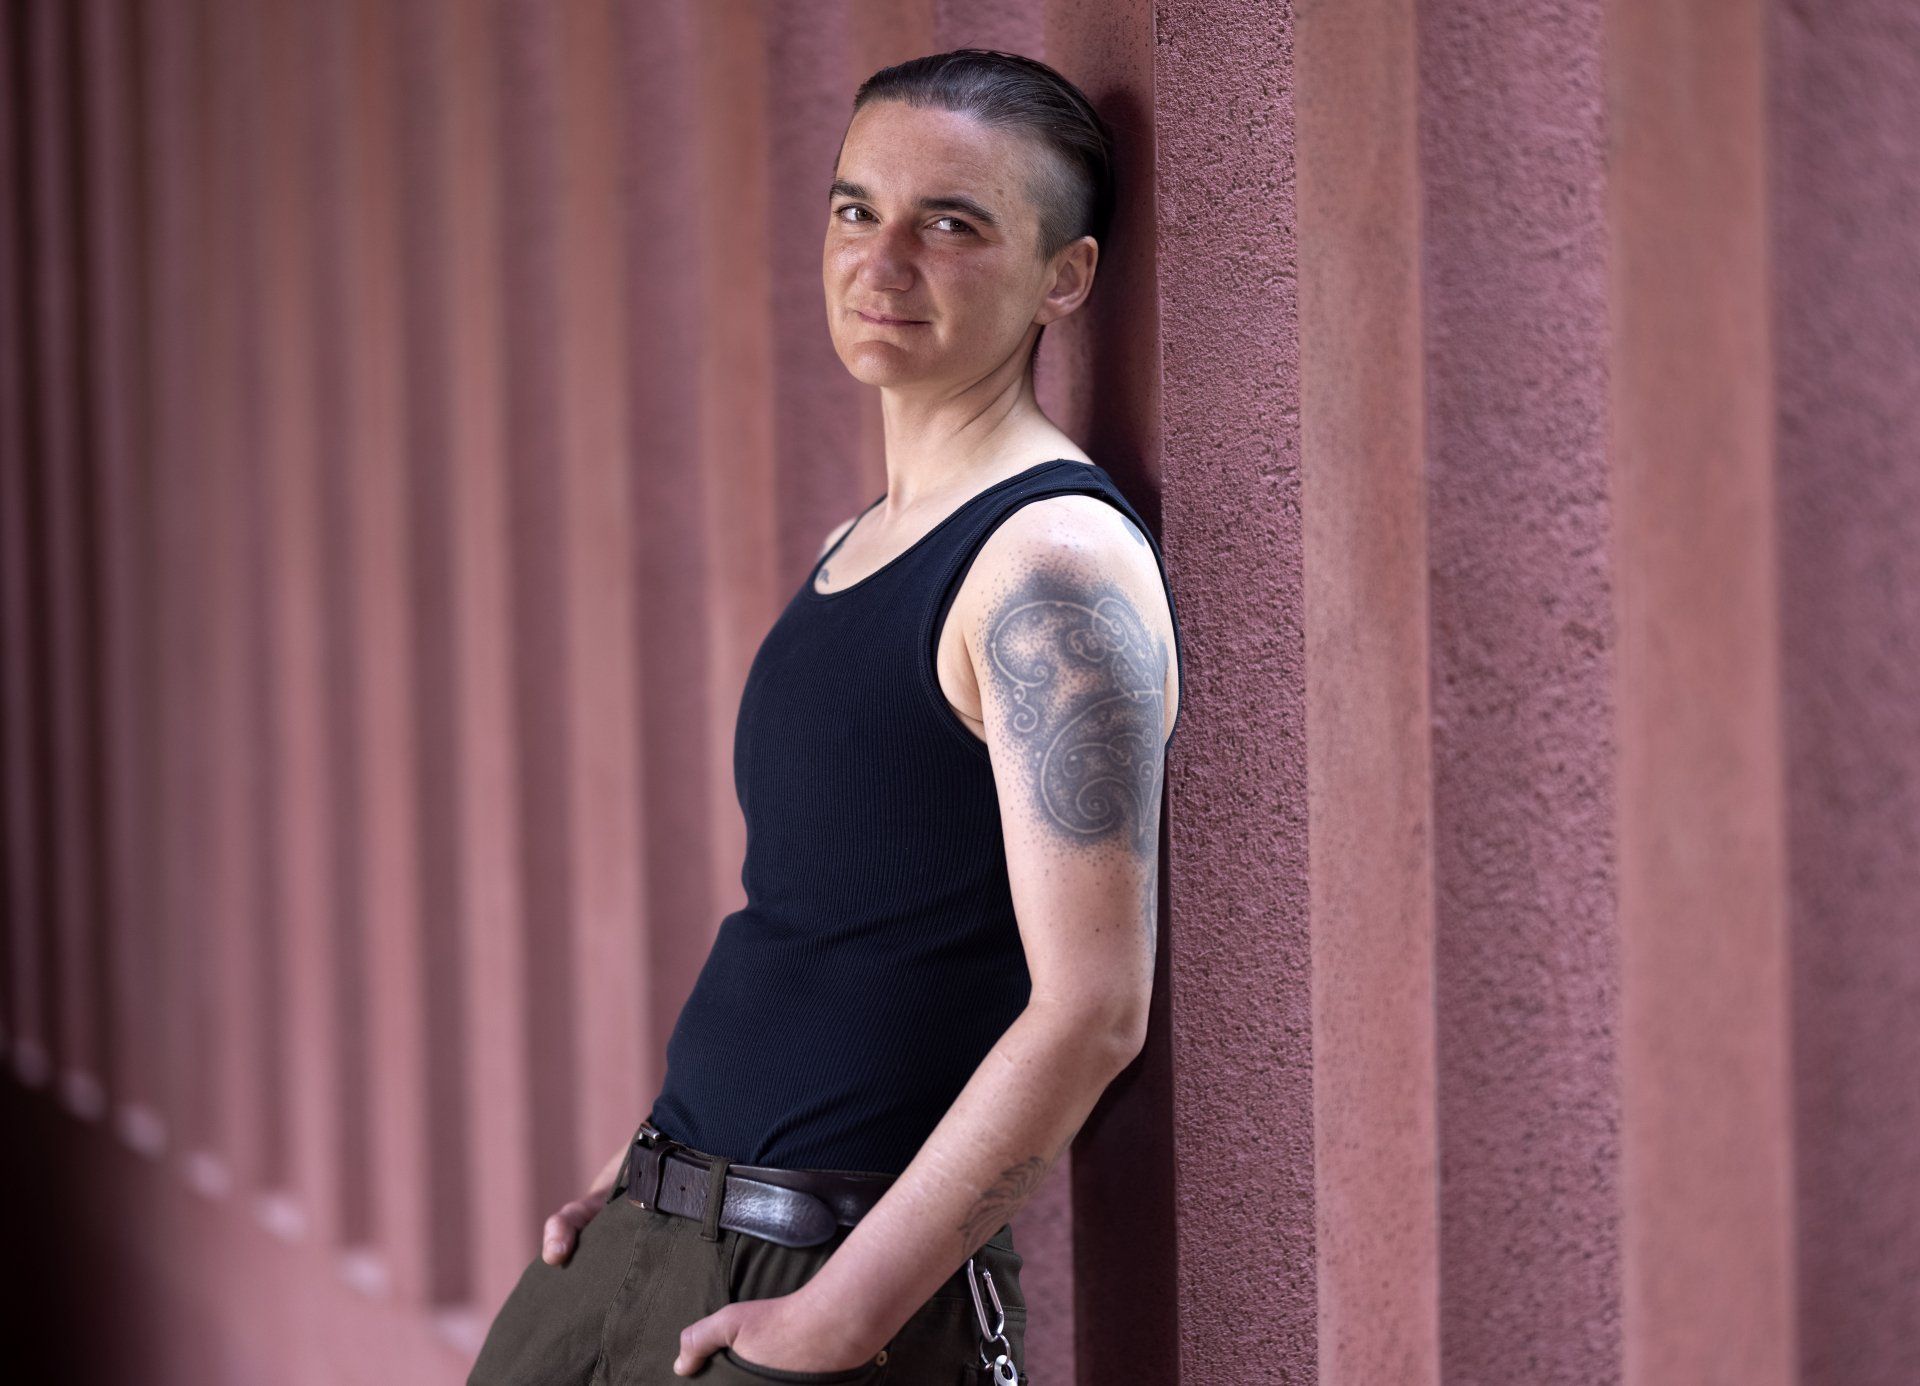 kim g standing against a terracotta colored concrete wall. They are wearing a black tank top with green pants, a swirling tattoo covering their left shoulder.